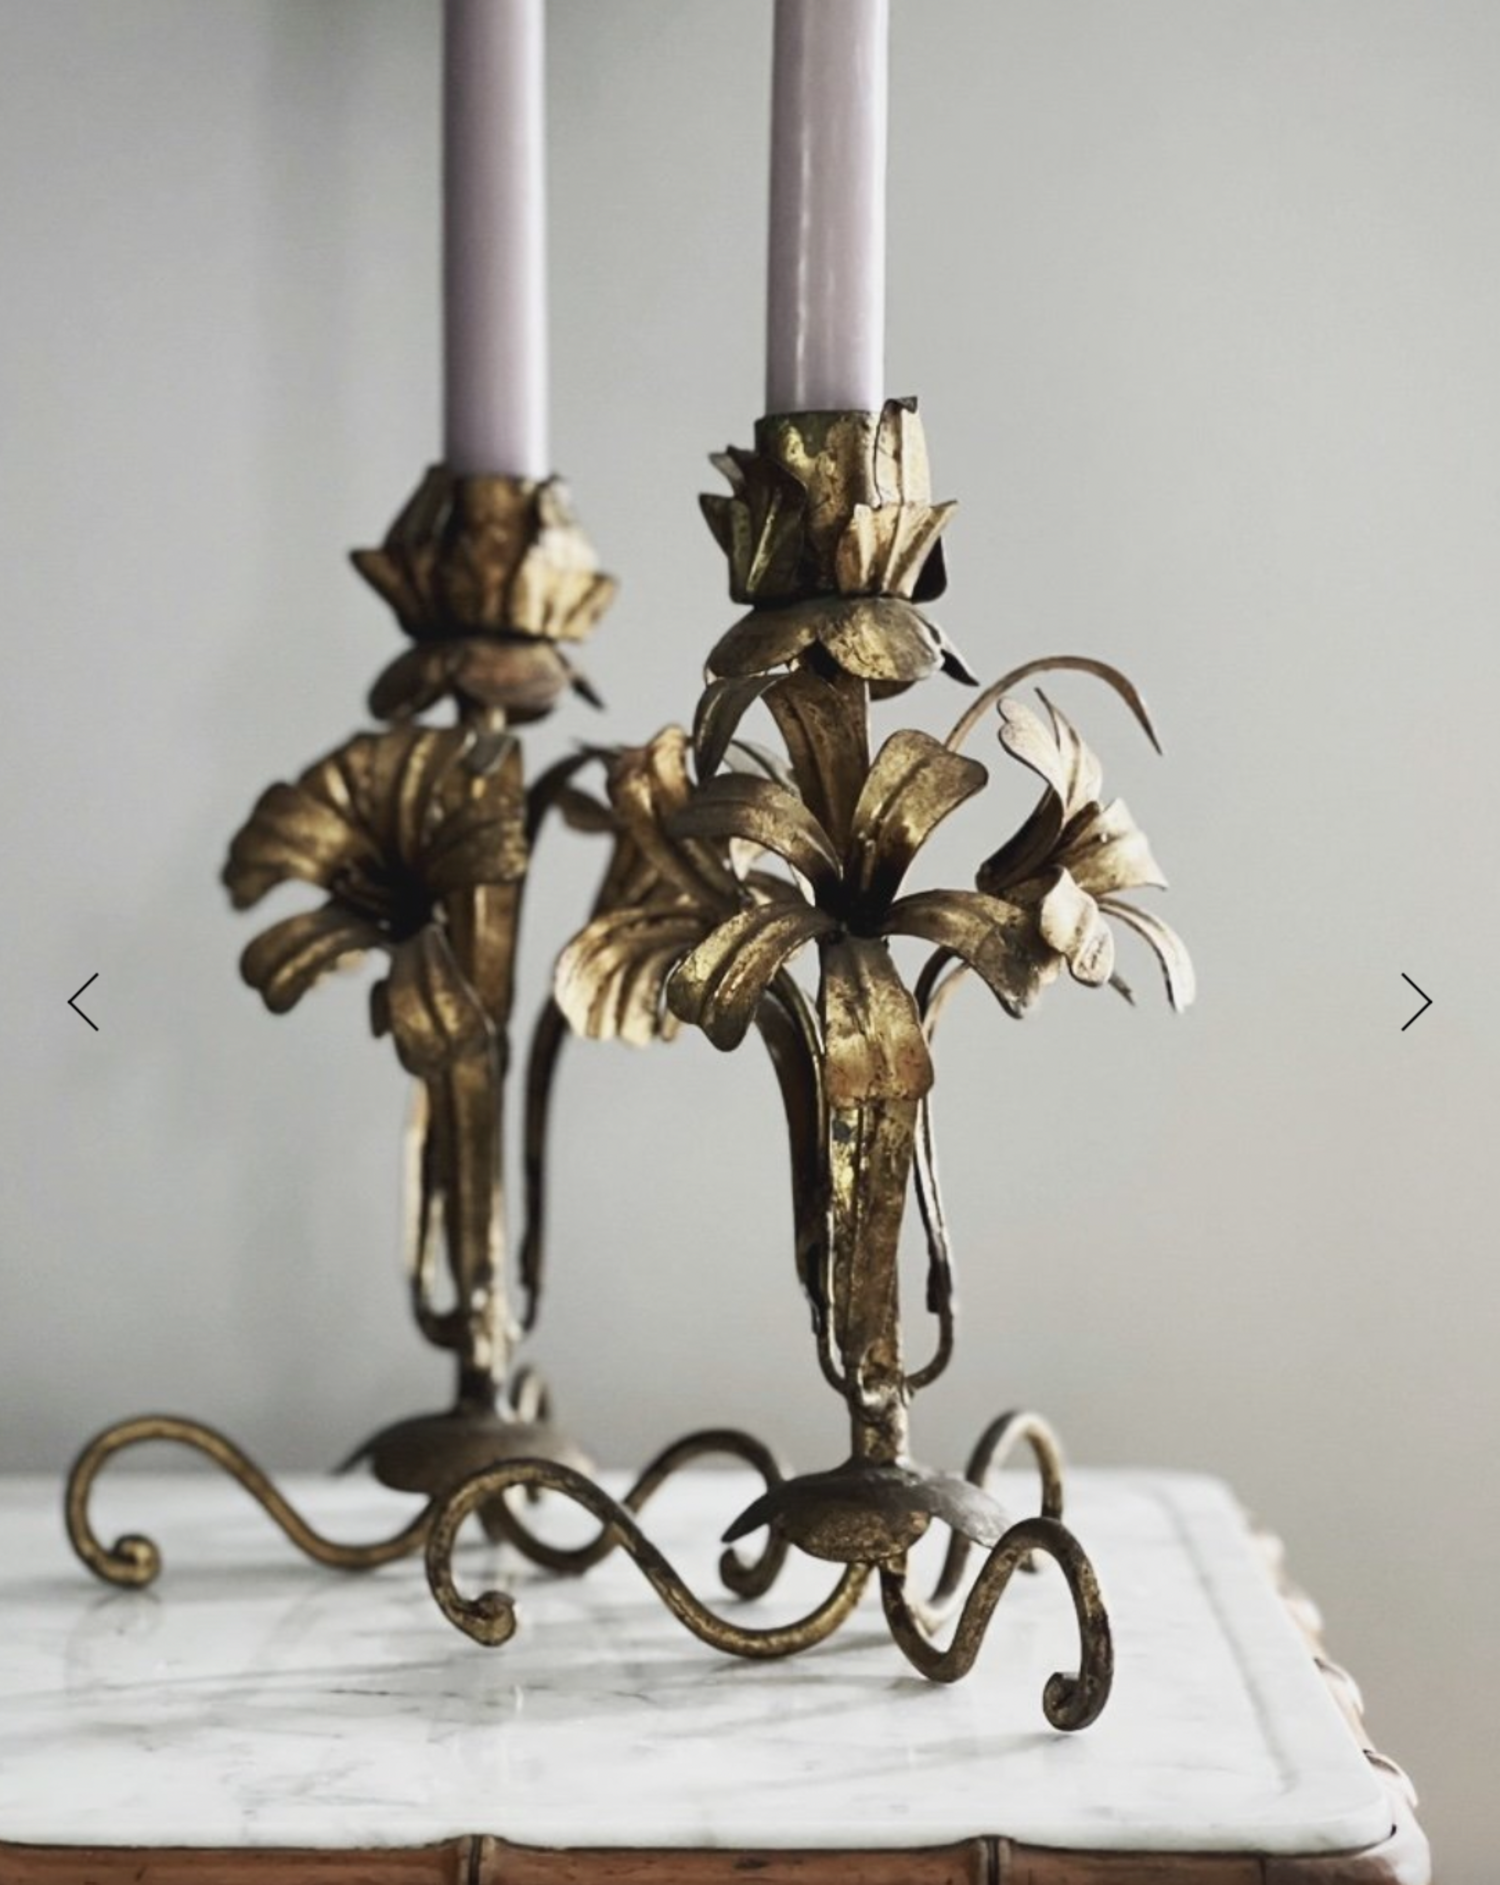 Small Candle Holders, Brass Candlesticks, Made in England. 